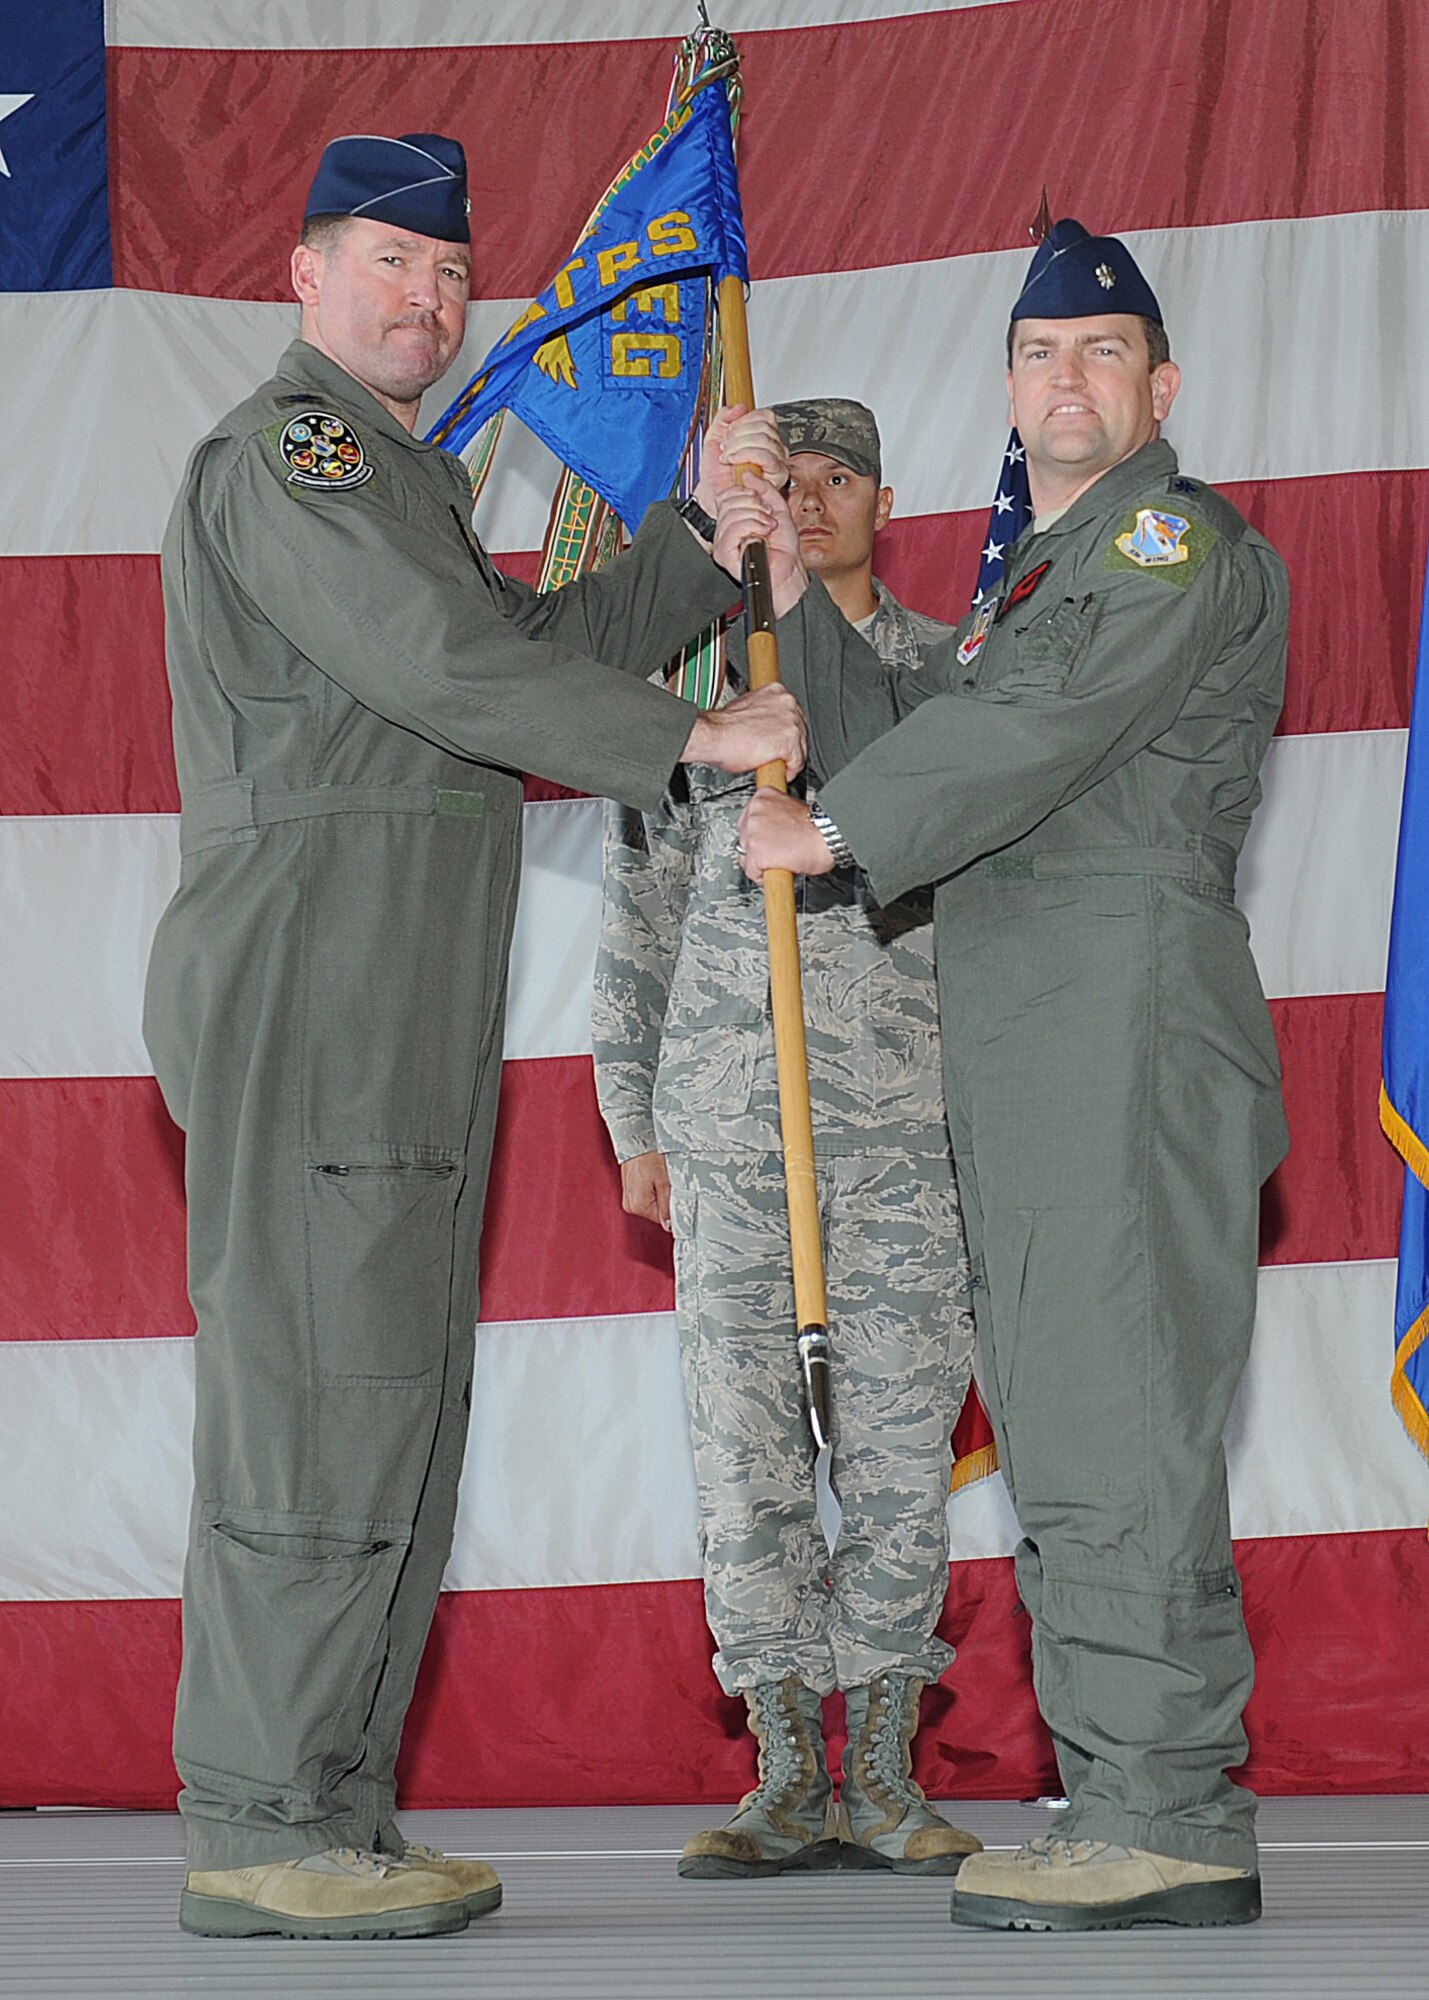 U.S. Air Force Col. Lance A. Wilkins, 53rd Weapons Evaluation Group commander (left), passes the ceremonial guidon to the new commander, Lt. Col. Ryan D. Serril (right), during the 82nd Aerial Targets Squadron change of command ceremony at Tyndall Air Force Base, Fla., June 9, 2017. The mission of the 82nd Aerial Targets Squadron is to provide safe, effective, and efficient aerial target support for Department of Defense sponsored weapons tests and evaluations programs. (U.S. Air Force photo by Airman 1st Class Delaney Rose/Released) 